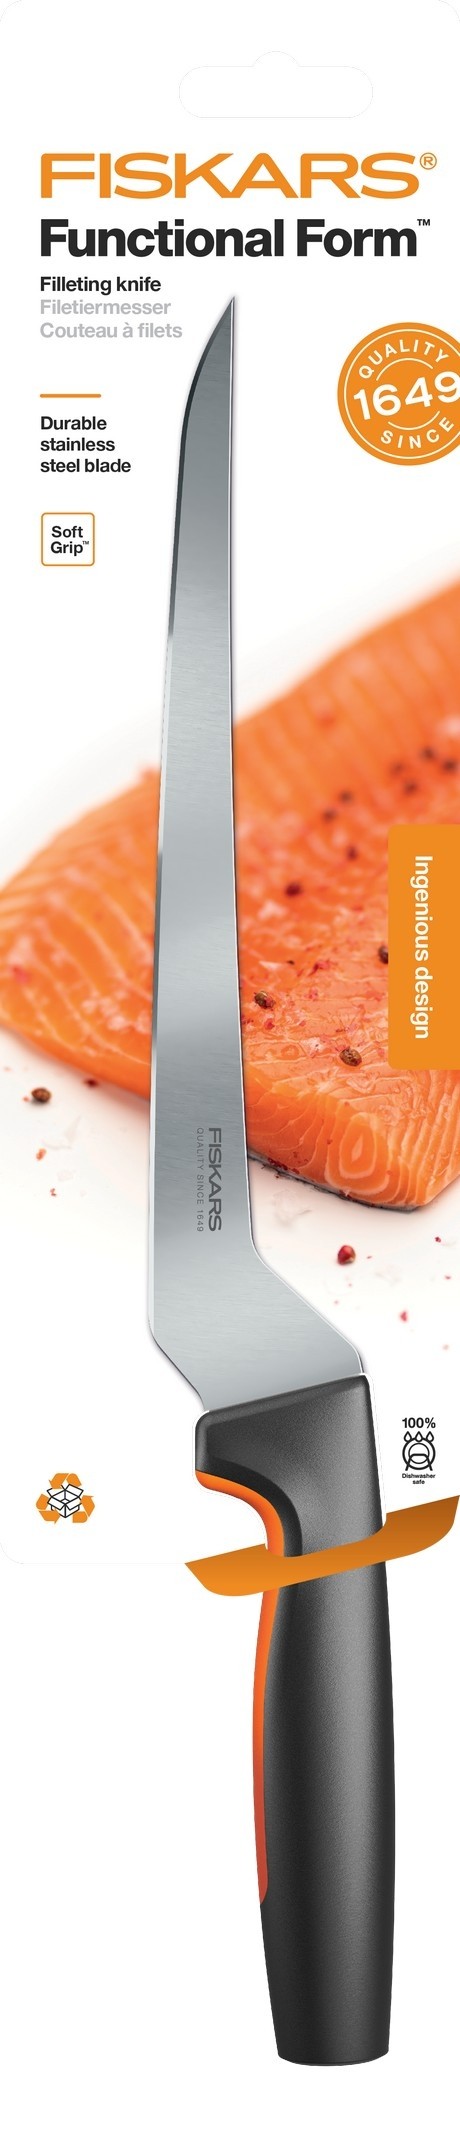 Purchase the Fiskars Functional Form Filleting Knife online at smithsofloughton.com